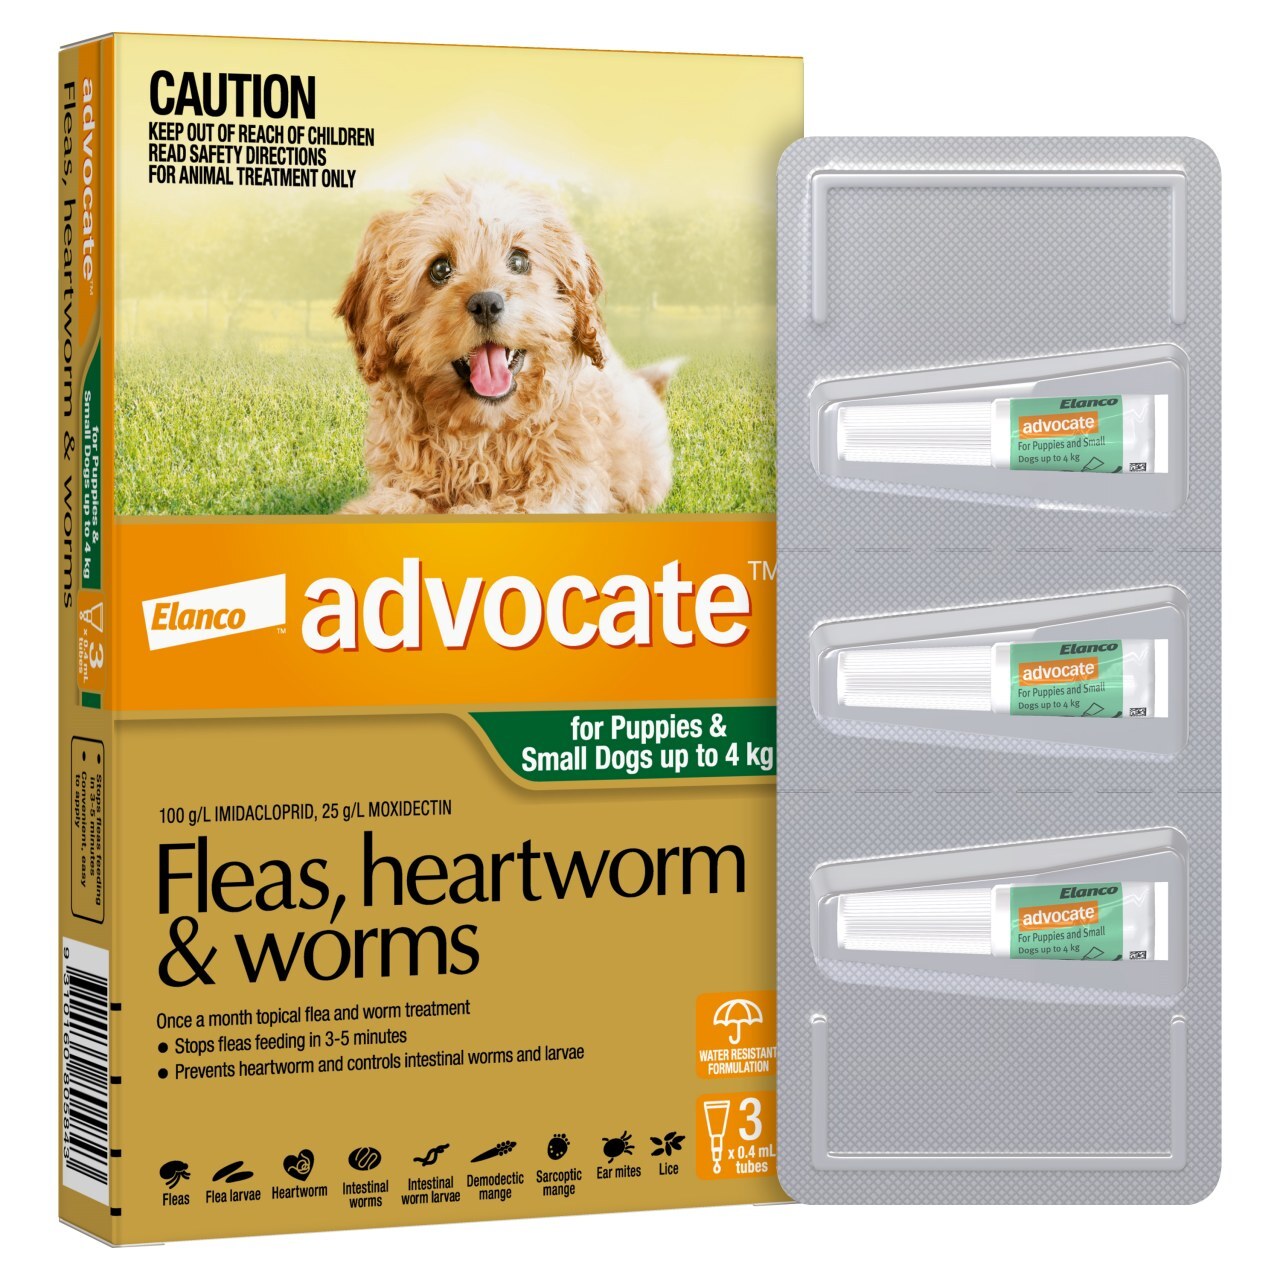 Advocate Spot-On Flea & Worm Control for Dogs up to 4kg - 3 pack image 2